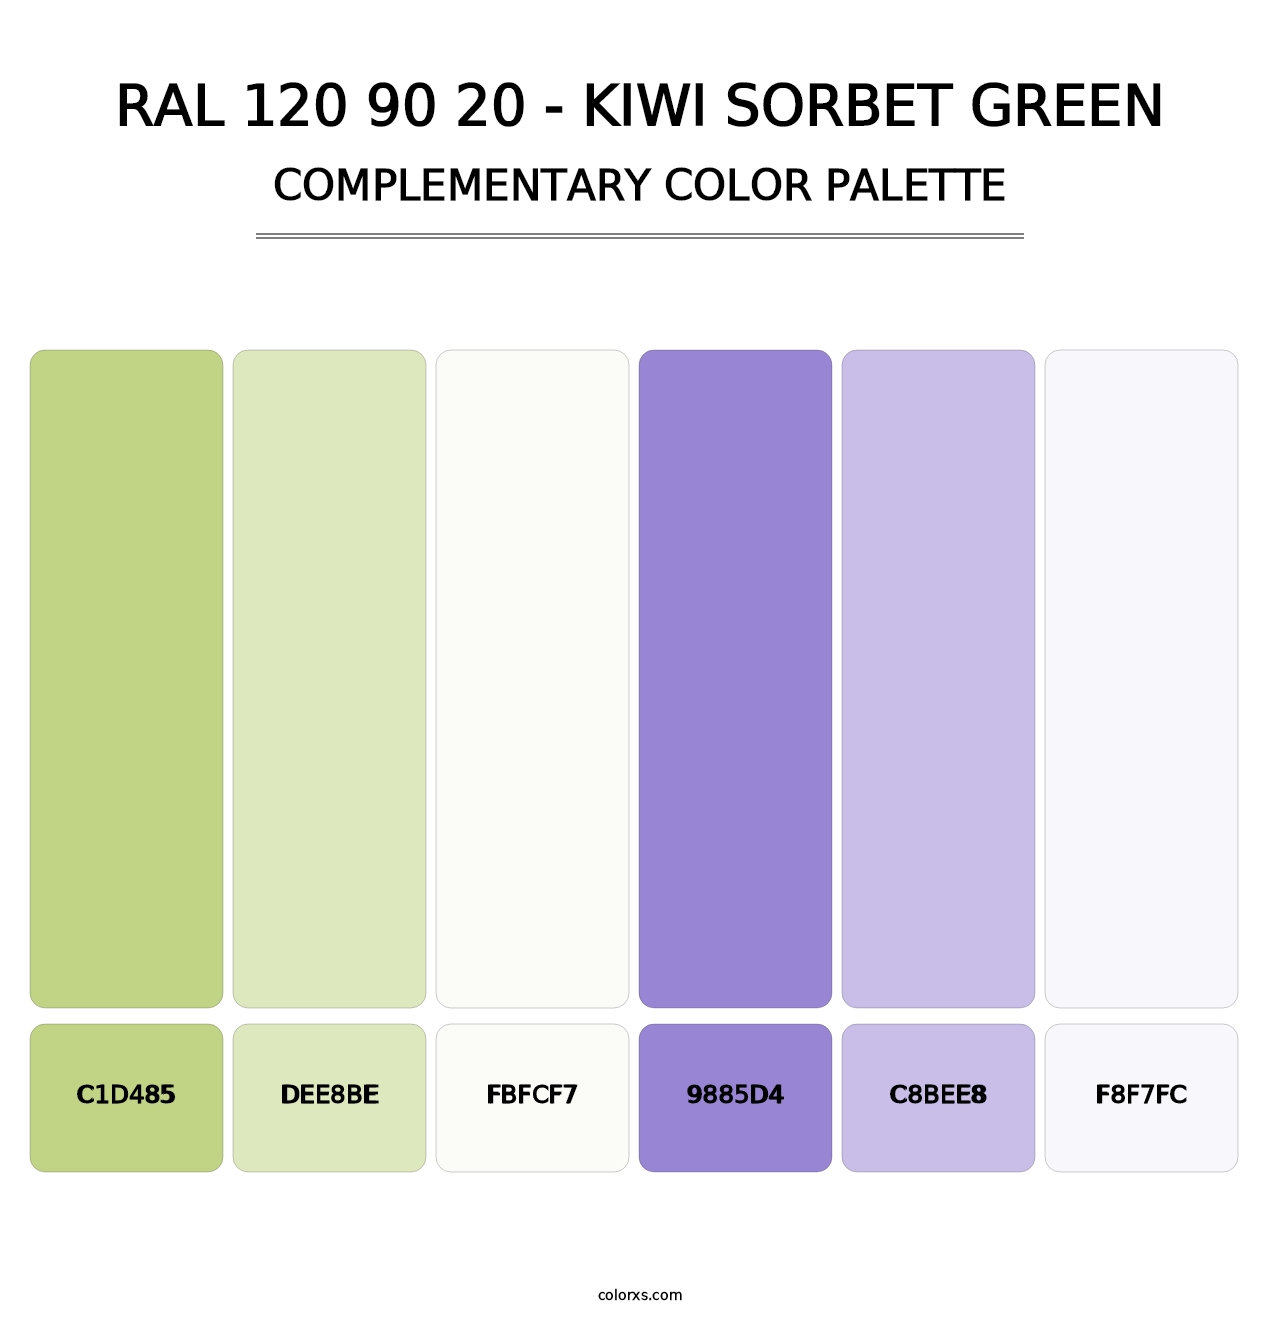 RAL 120 90 20 - Kiwi Sorbet Green - Complementary Color Palette